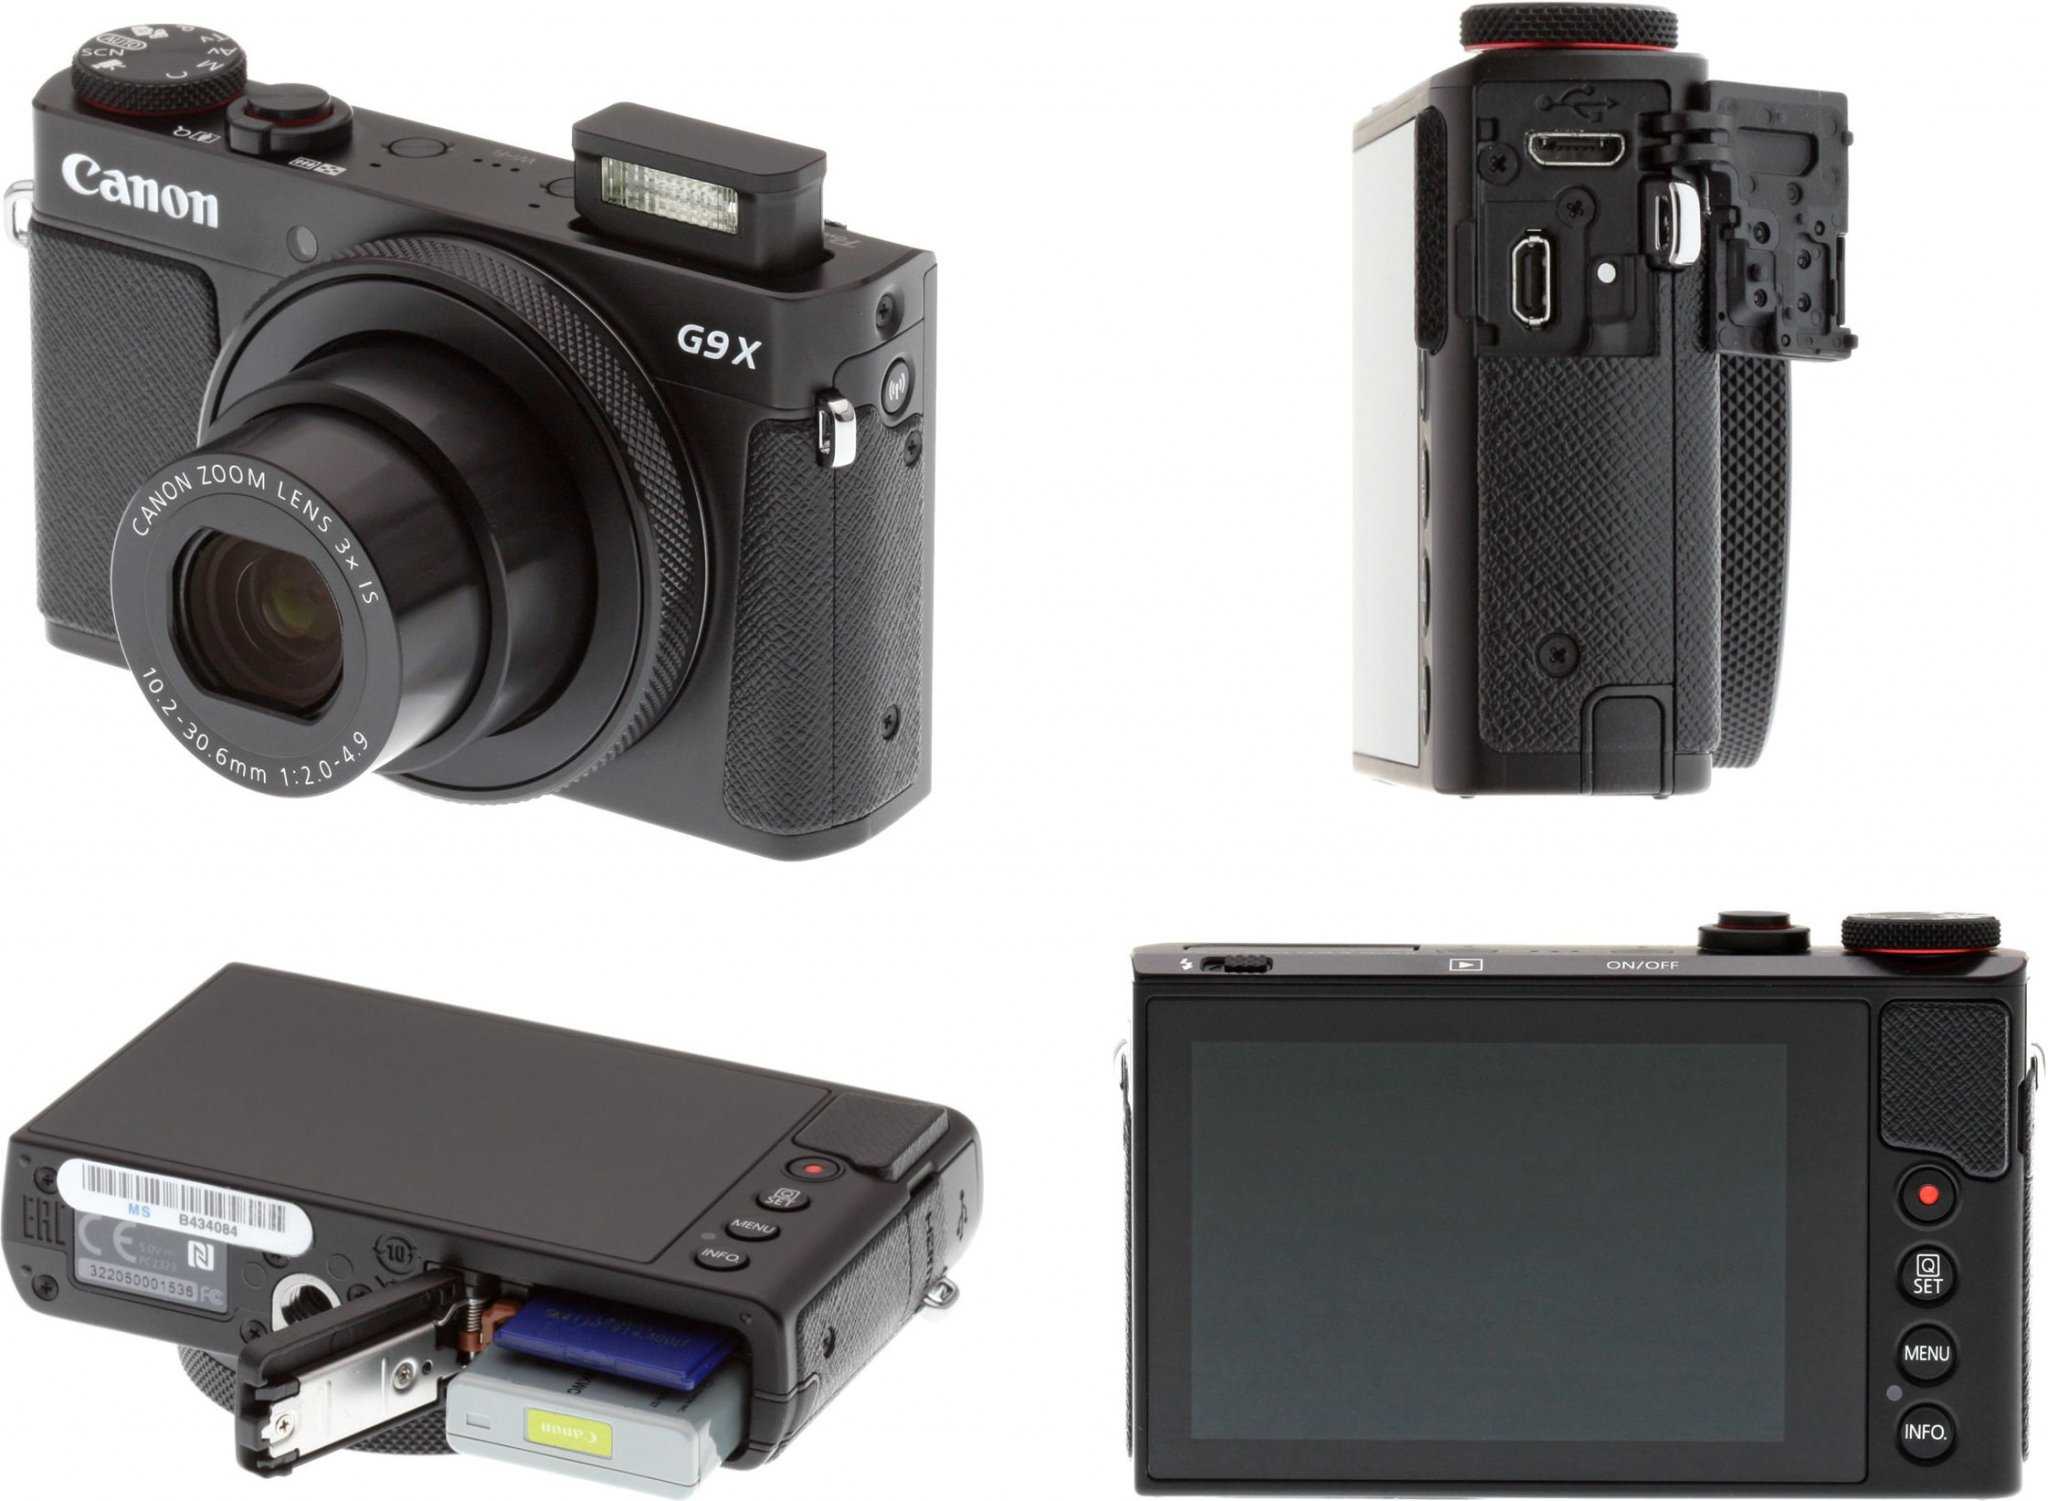 Canon powershot g9 x mark ii review | pcmag